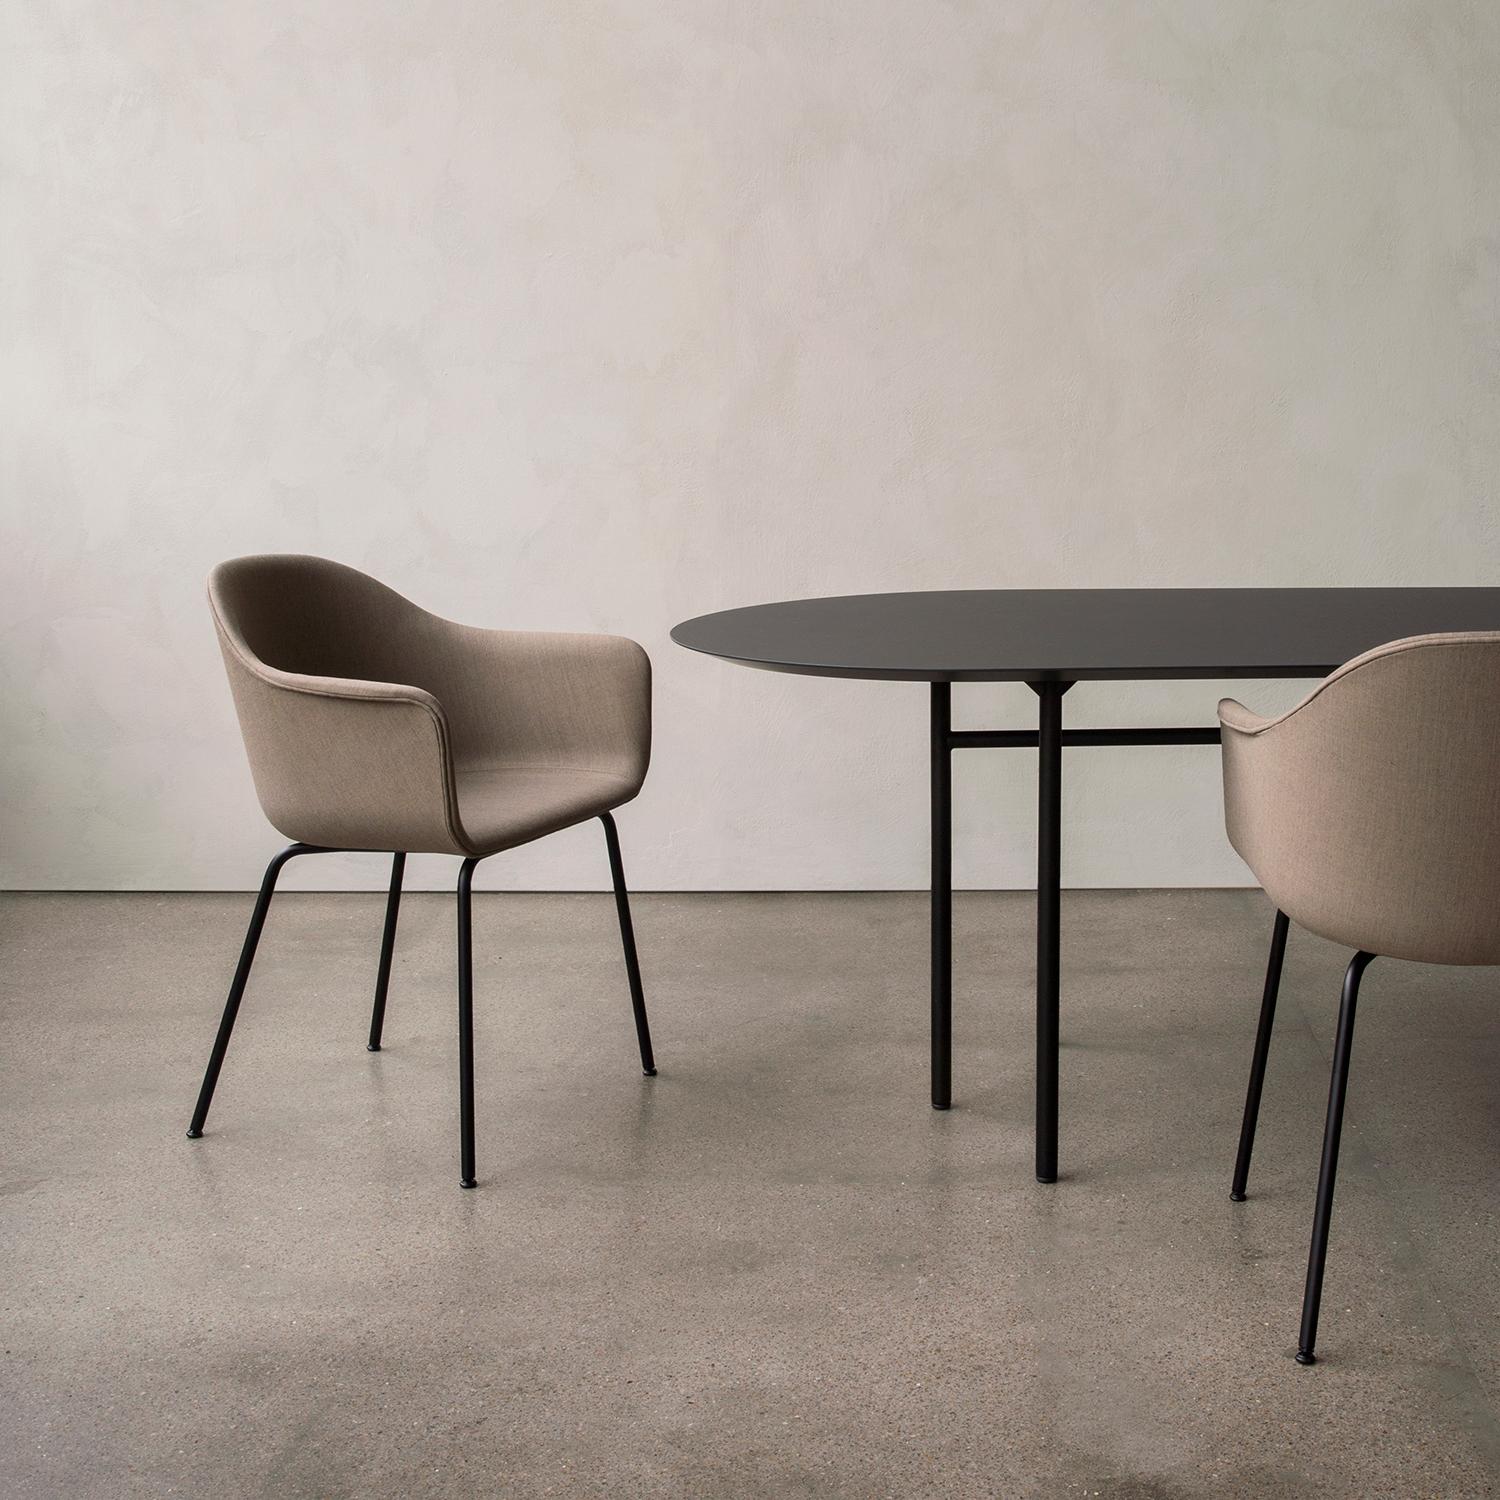 Powder-Coated Harbour Chair, Black Steel Legs and a Leather covered Shell, Nevotex 